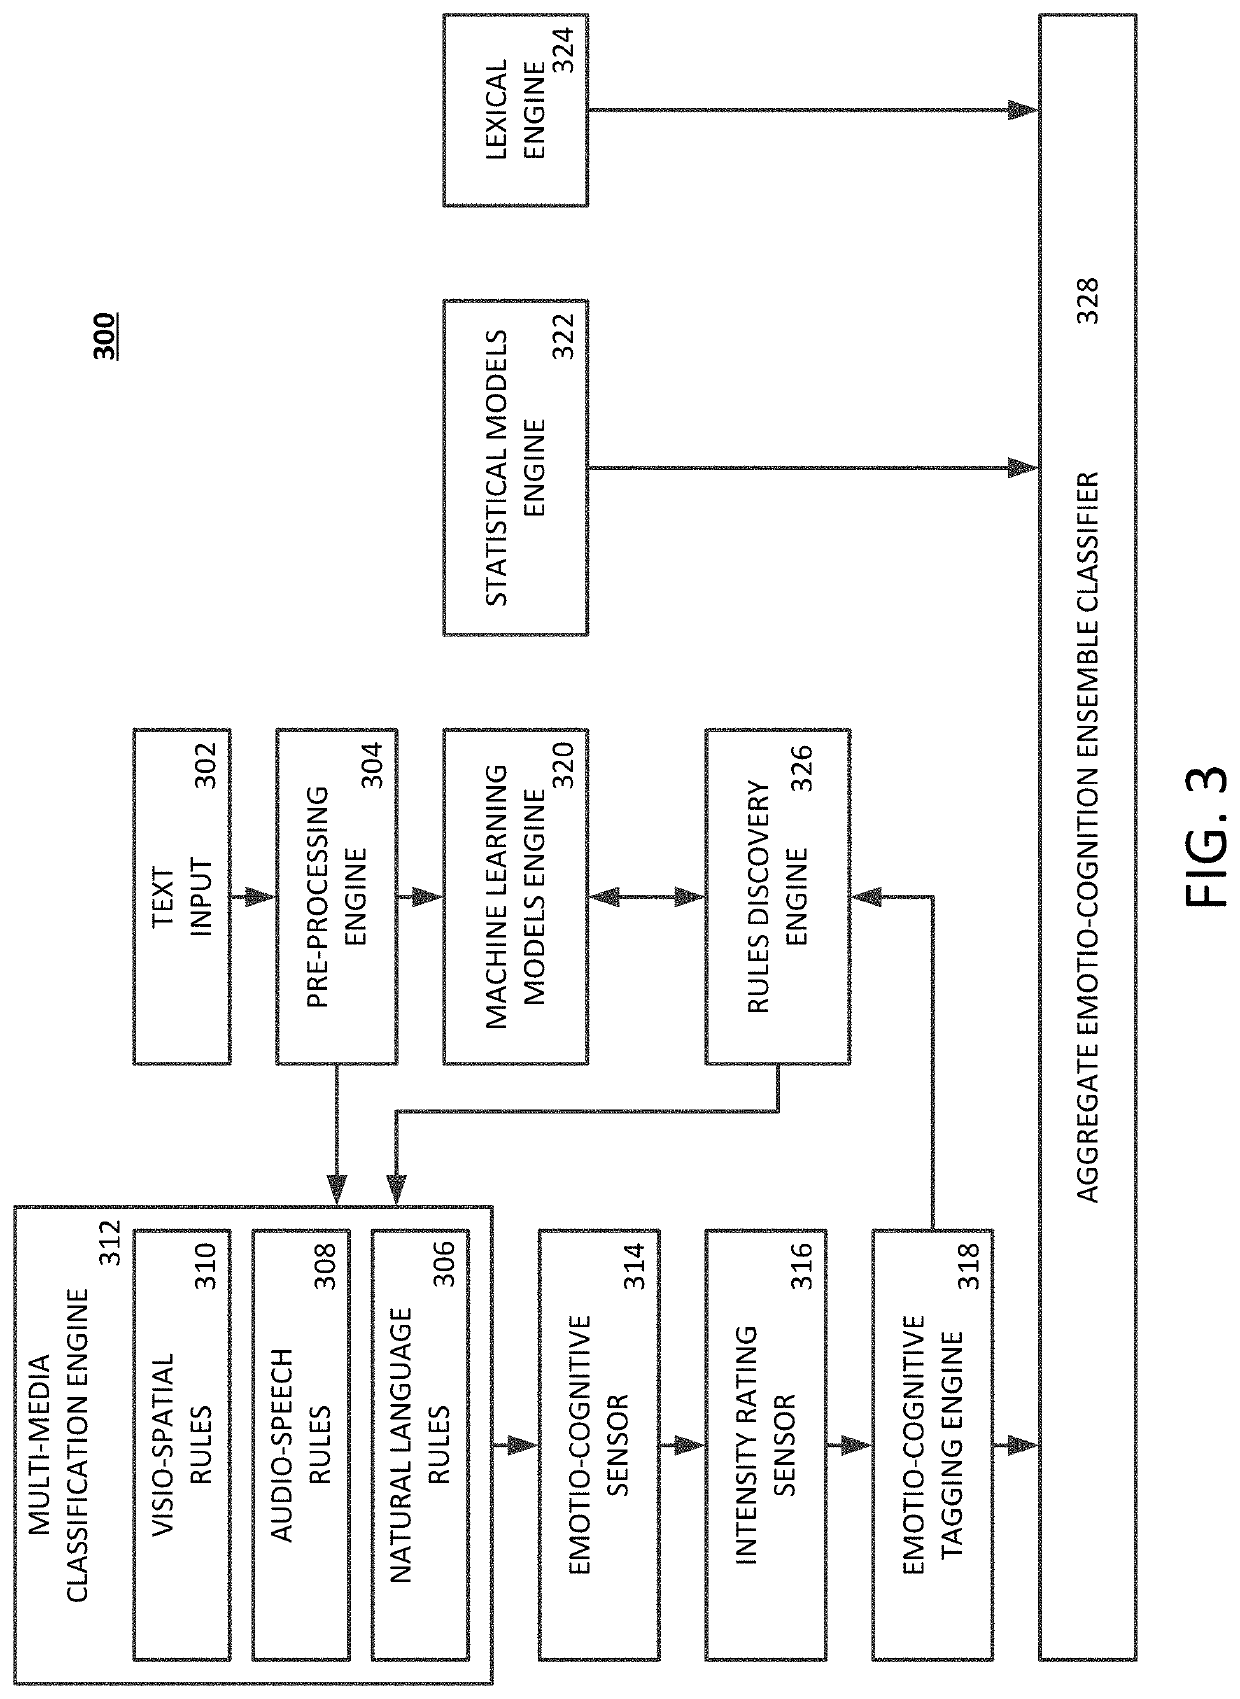 Automated classification of emotio-cogniton